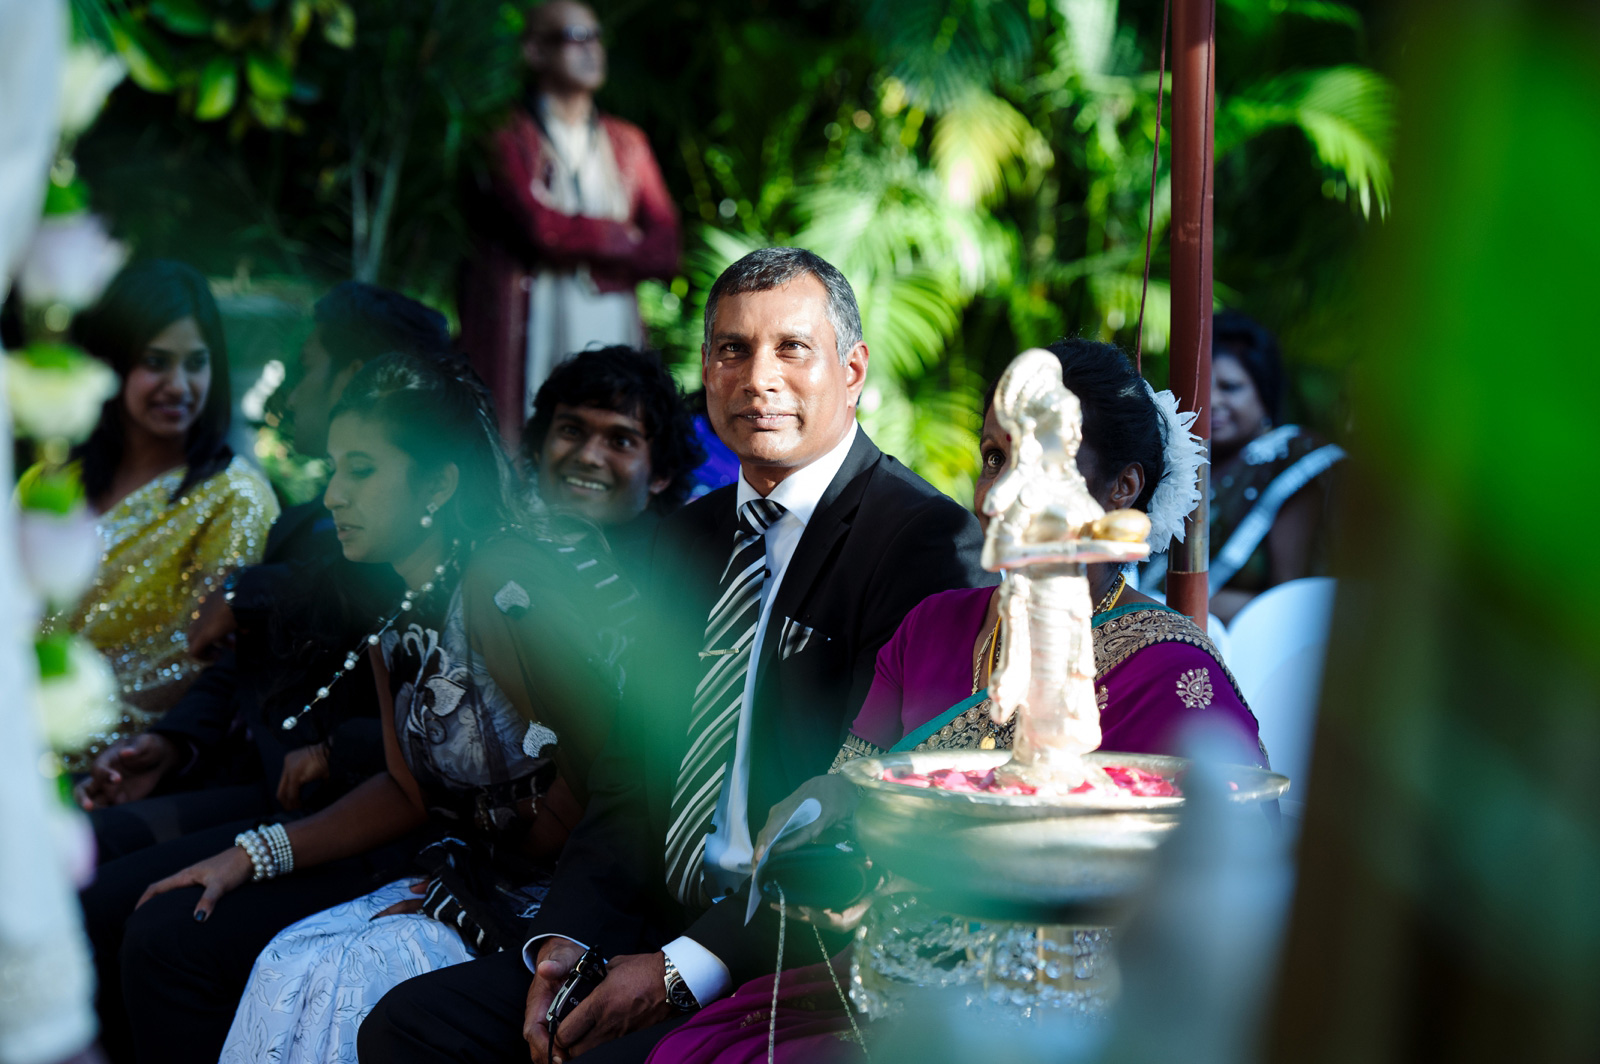 father at wedding